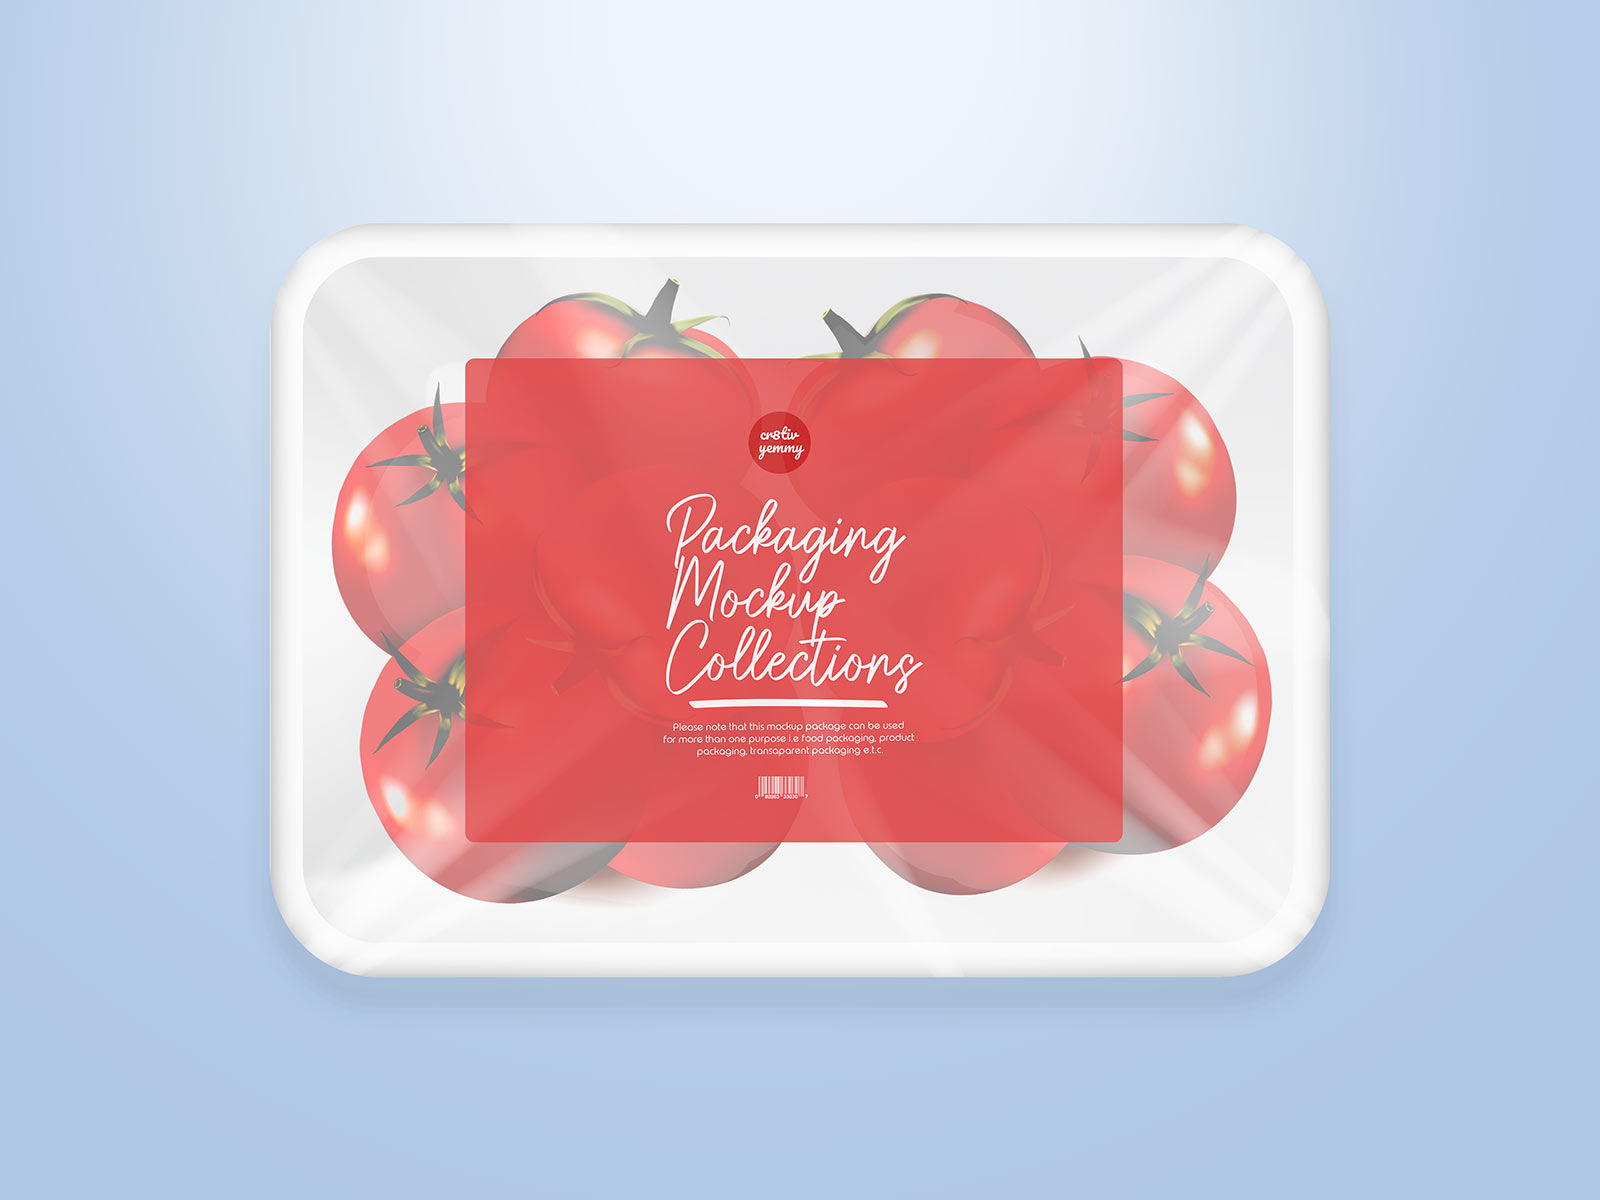 A free packaging mockup templates